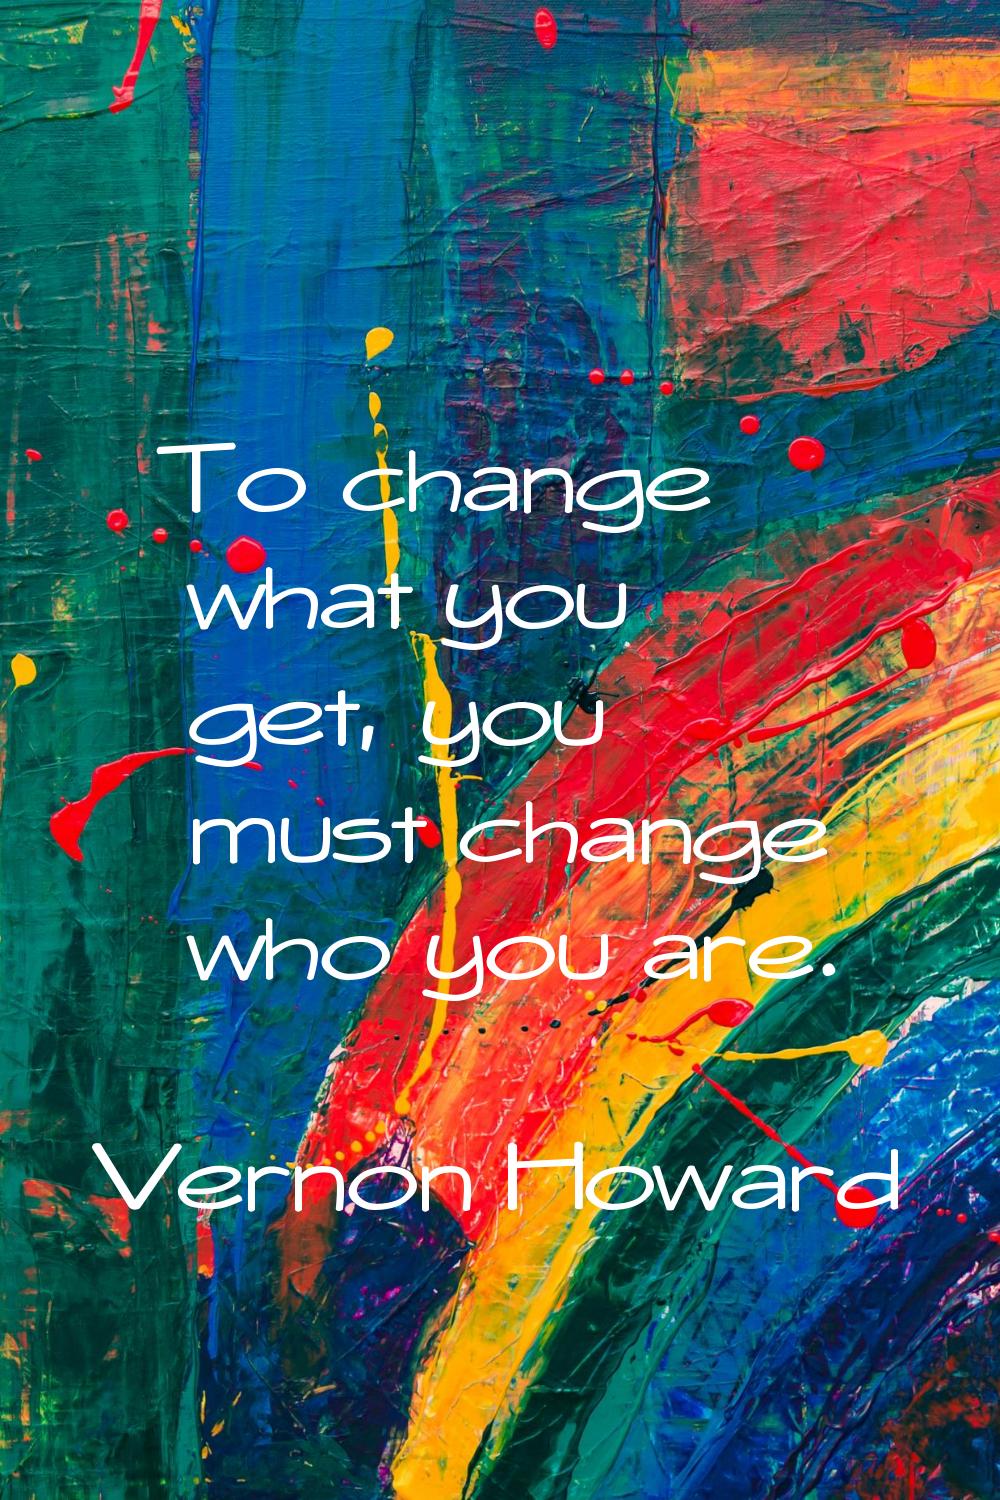 To change what you get, you must change who you are.